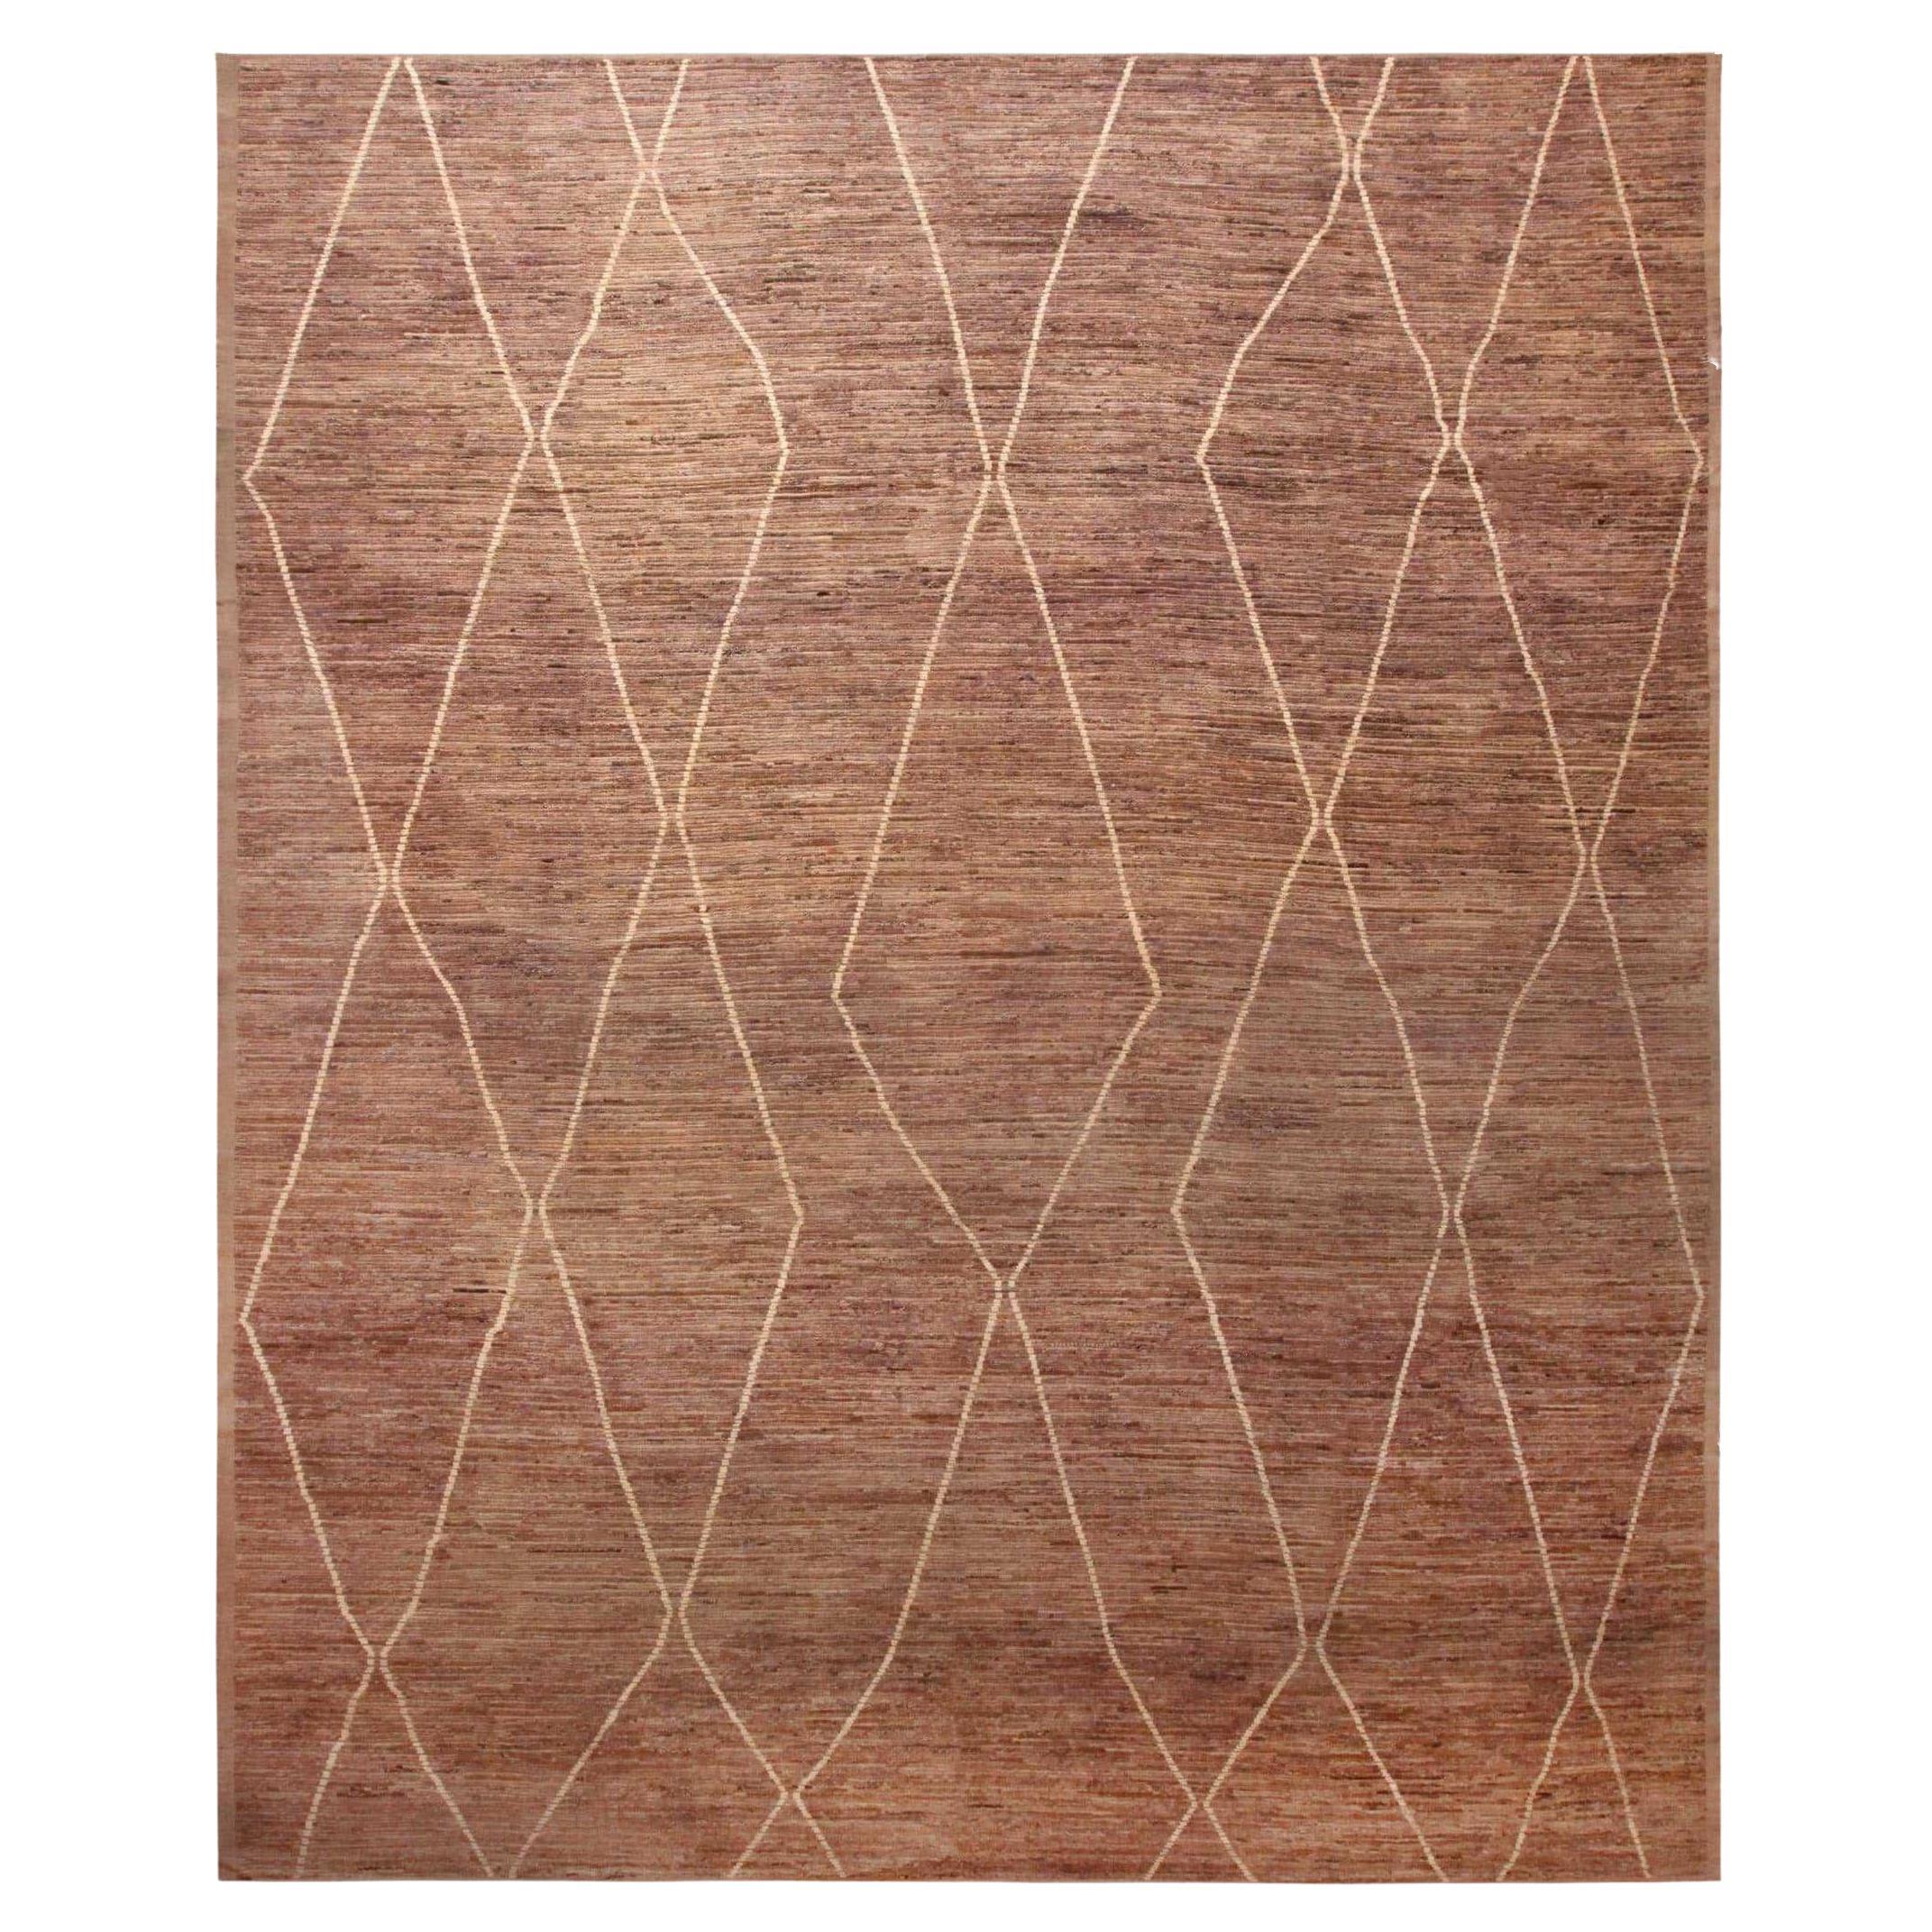 Nazmiyal Collection Tribal Moroccan Style Contemporary Area Rug 13'2" x 15'8"